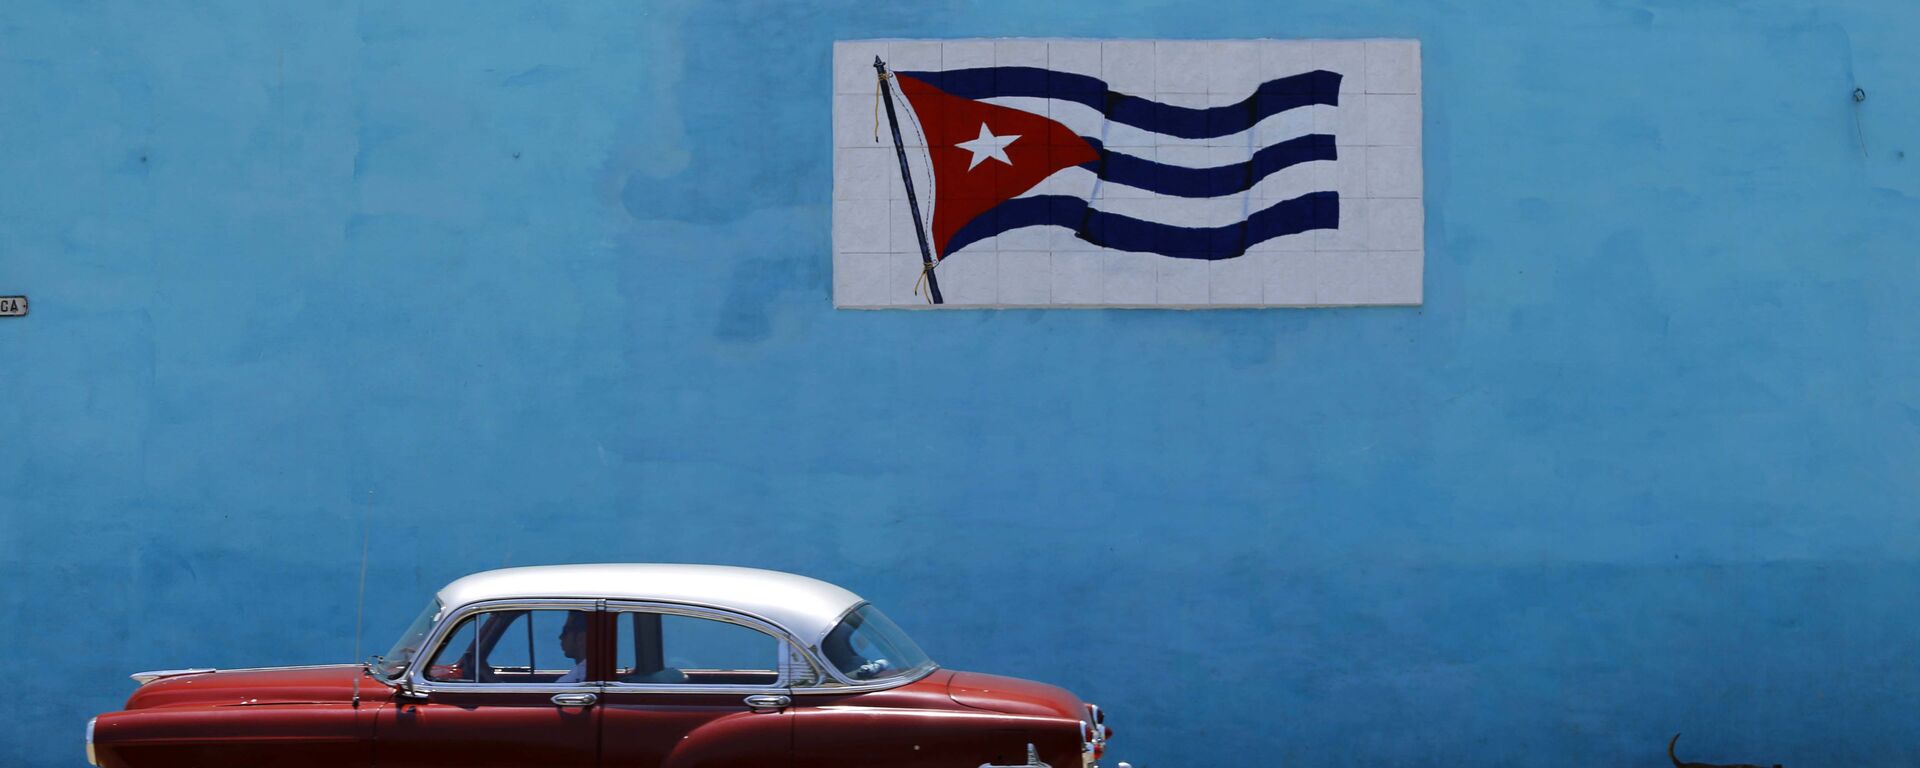 A driver steers his classic car past a wall decorated with a Cuban flag in Havana - Sputnik International, 1920, 13.03.2021